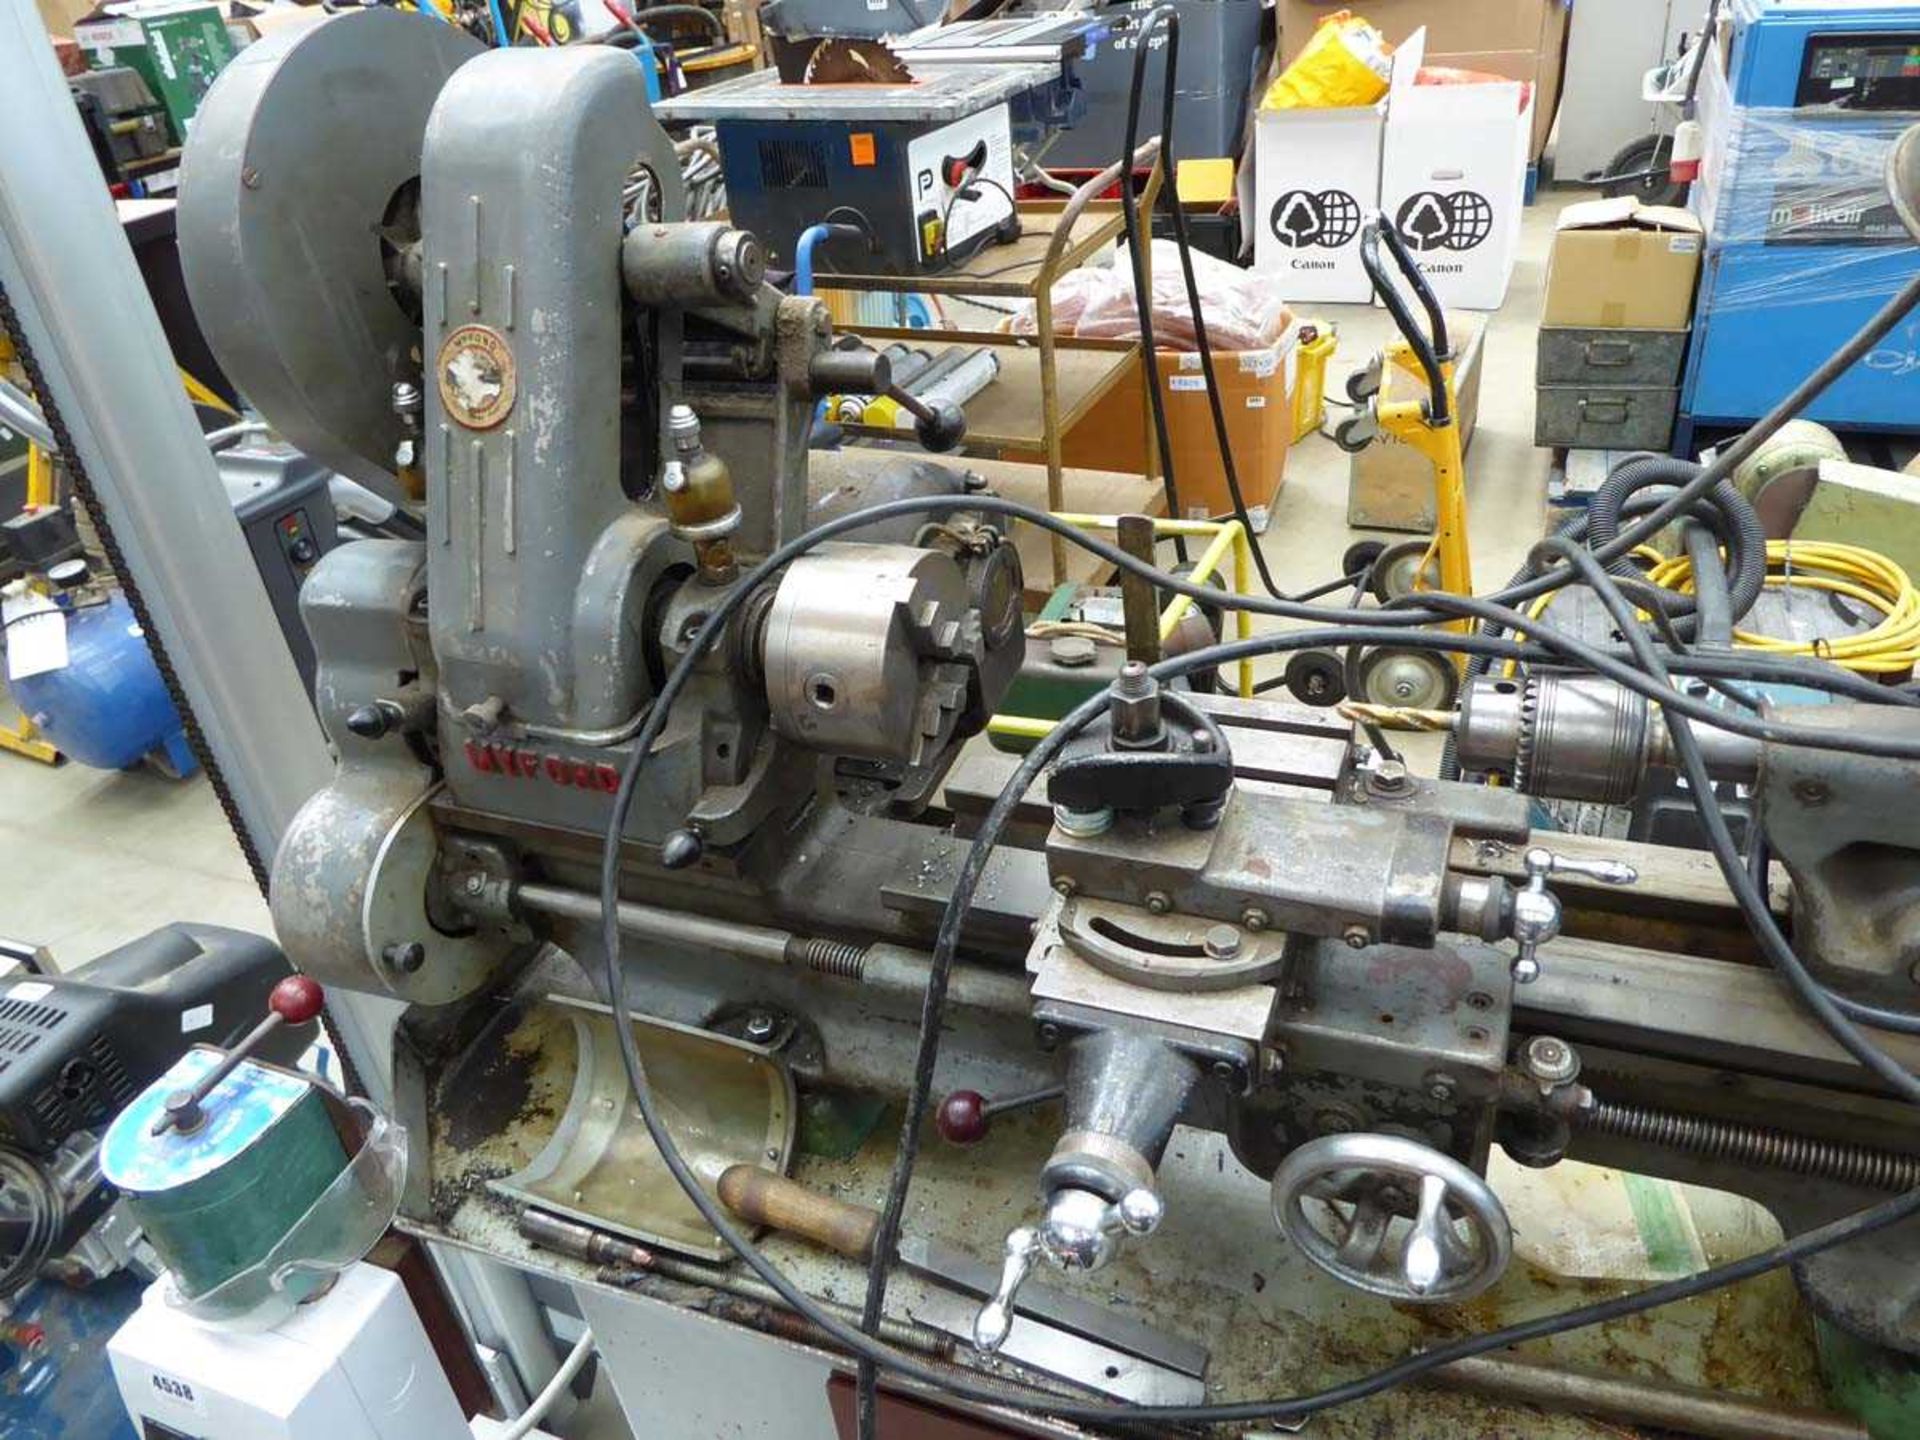 Myford engineers model making lathe with a range of tooling, single phase with control box. - Image 2 of 3